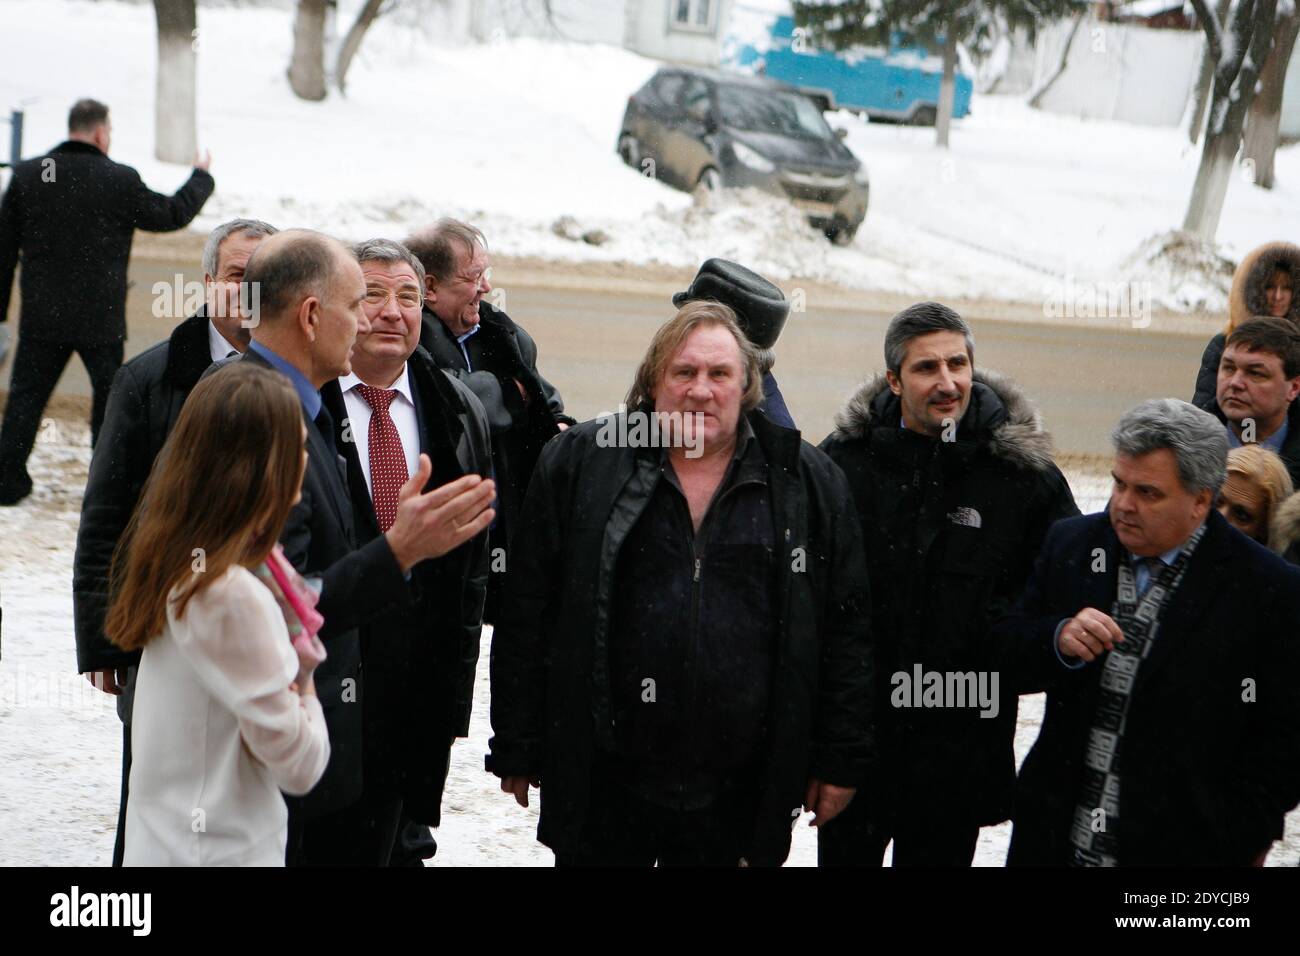 French actor Gerard Depardieu (L) who was granted Russian citizenship is accompanied by Head of the Republic of Mordovia Vladimir Volkov while visiting Yemelyan Pugachev's fort in Saransk, Mordovia, Russia, January 6, 2013. Photo Marine Dumeurger/ABACAPRESS.COM Stock Photo